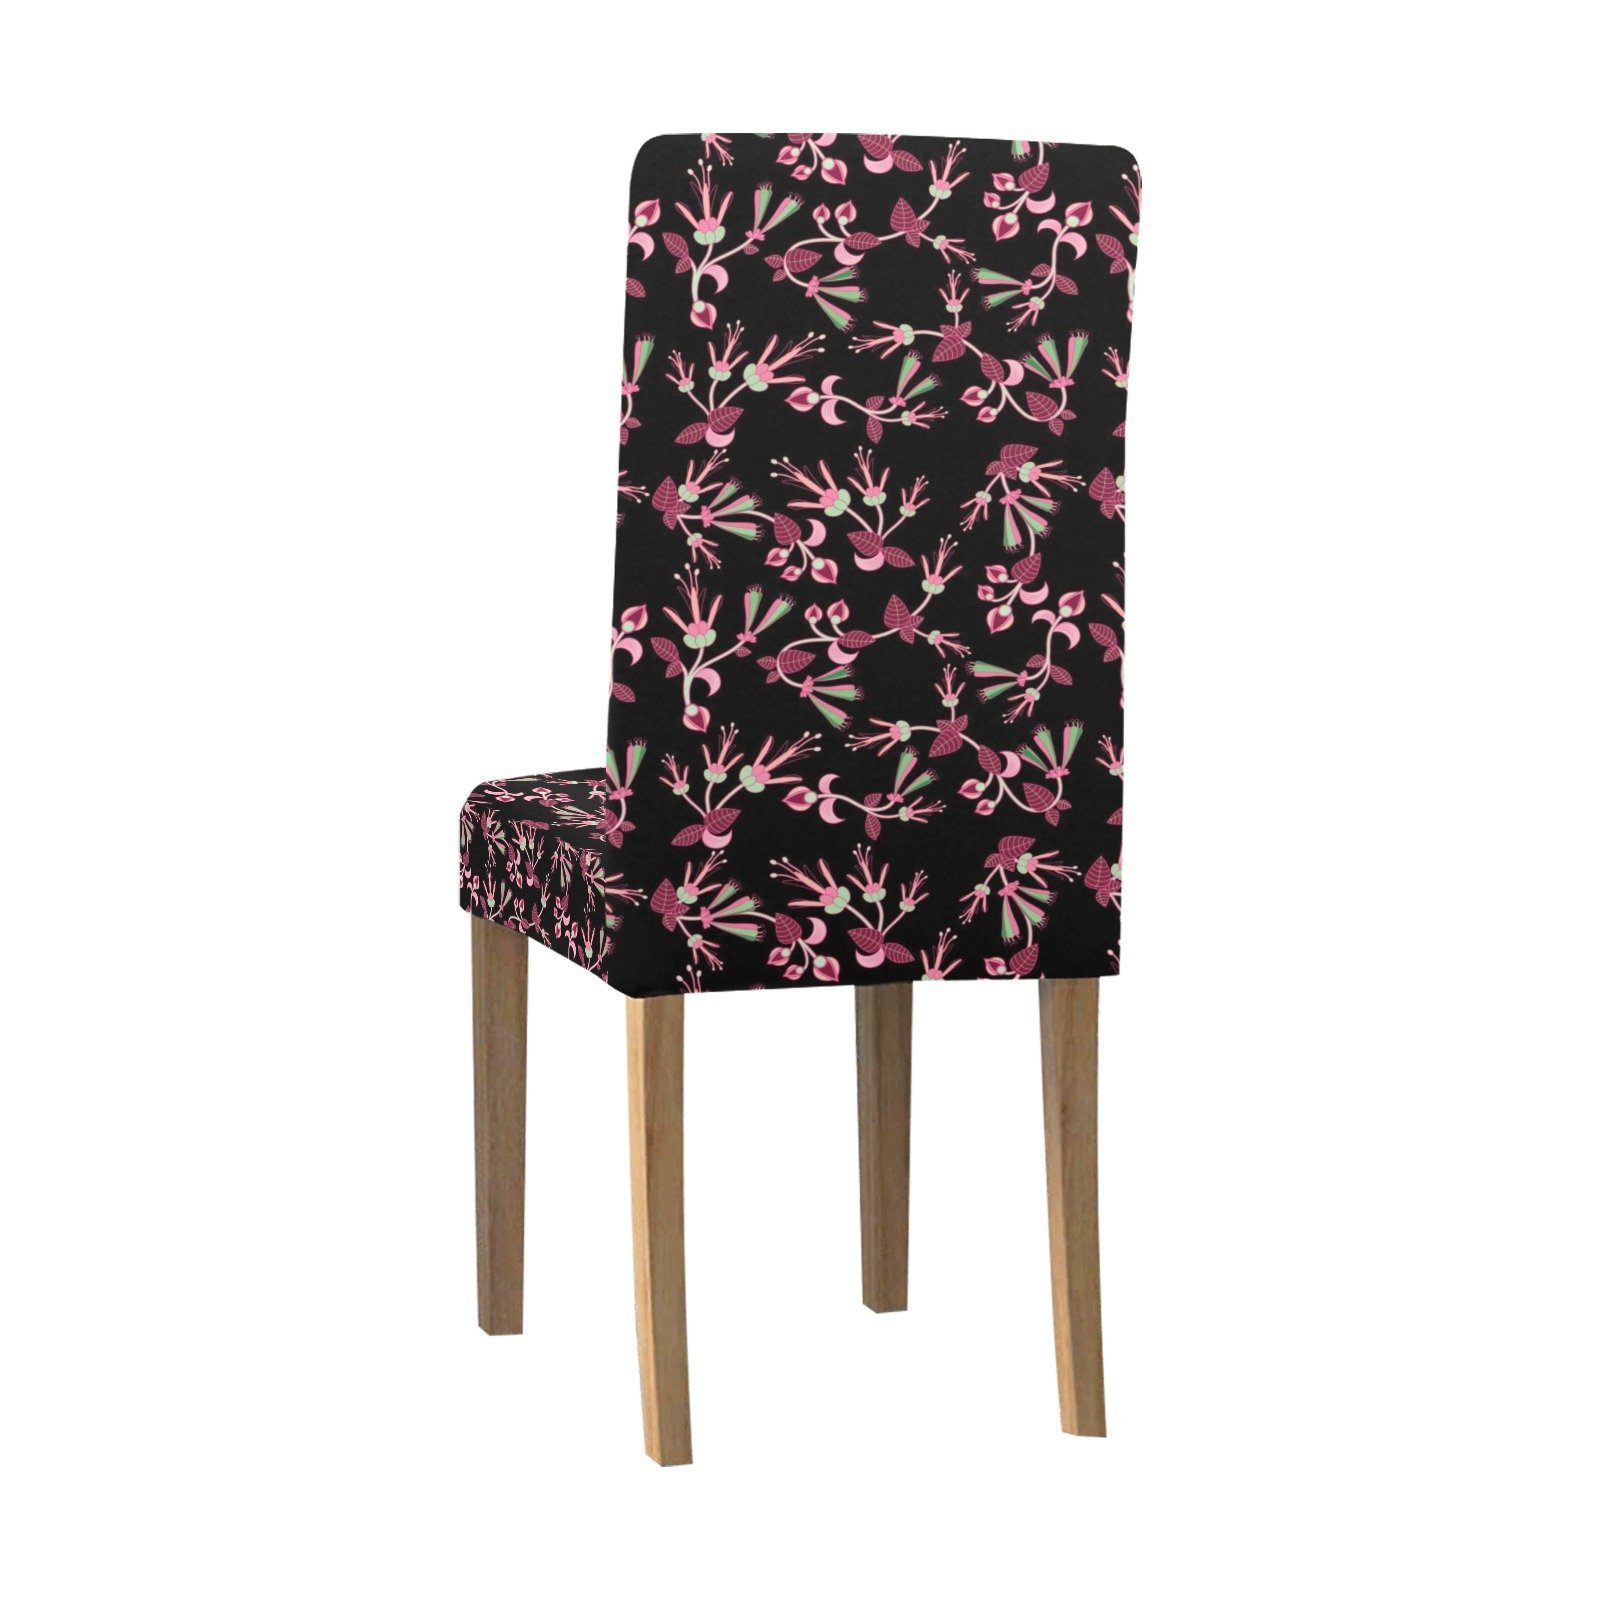 Floral Green Black Chair Cover (Pack of 6) Chair Cover (Pack of 6) e-joyer 